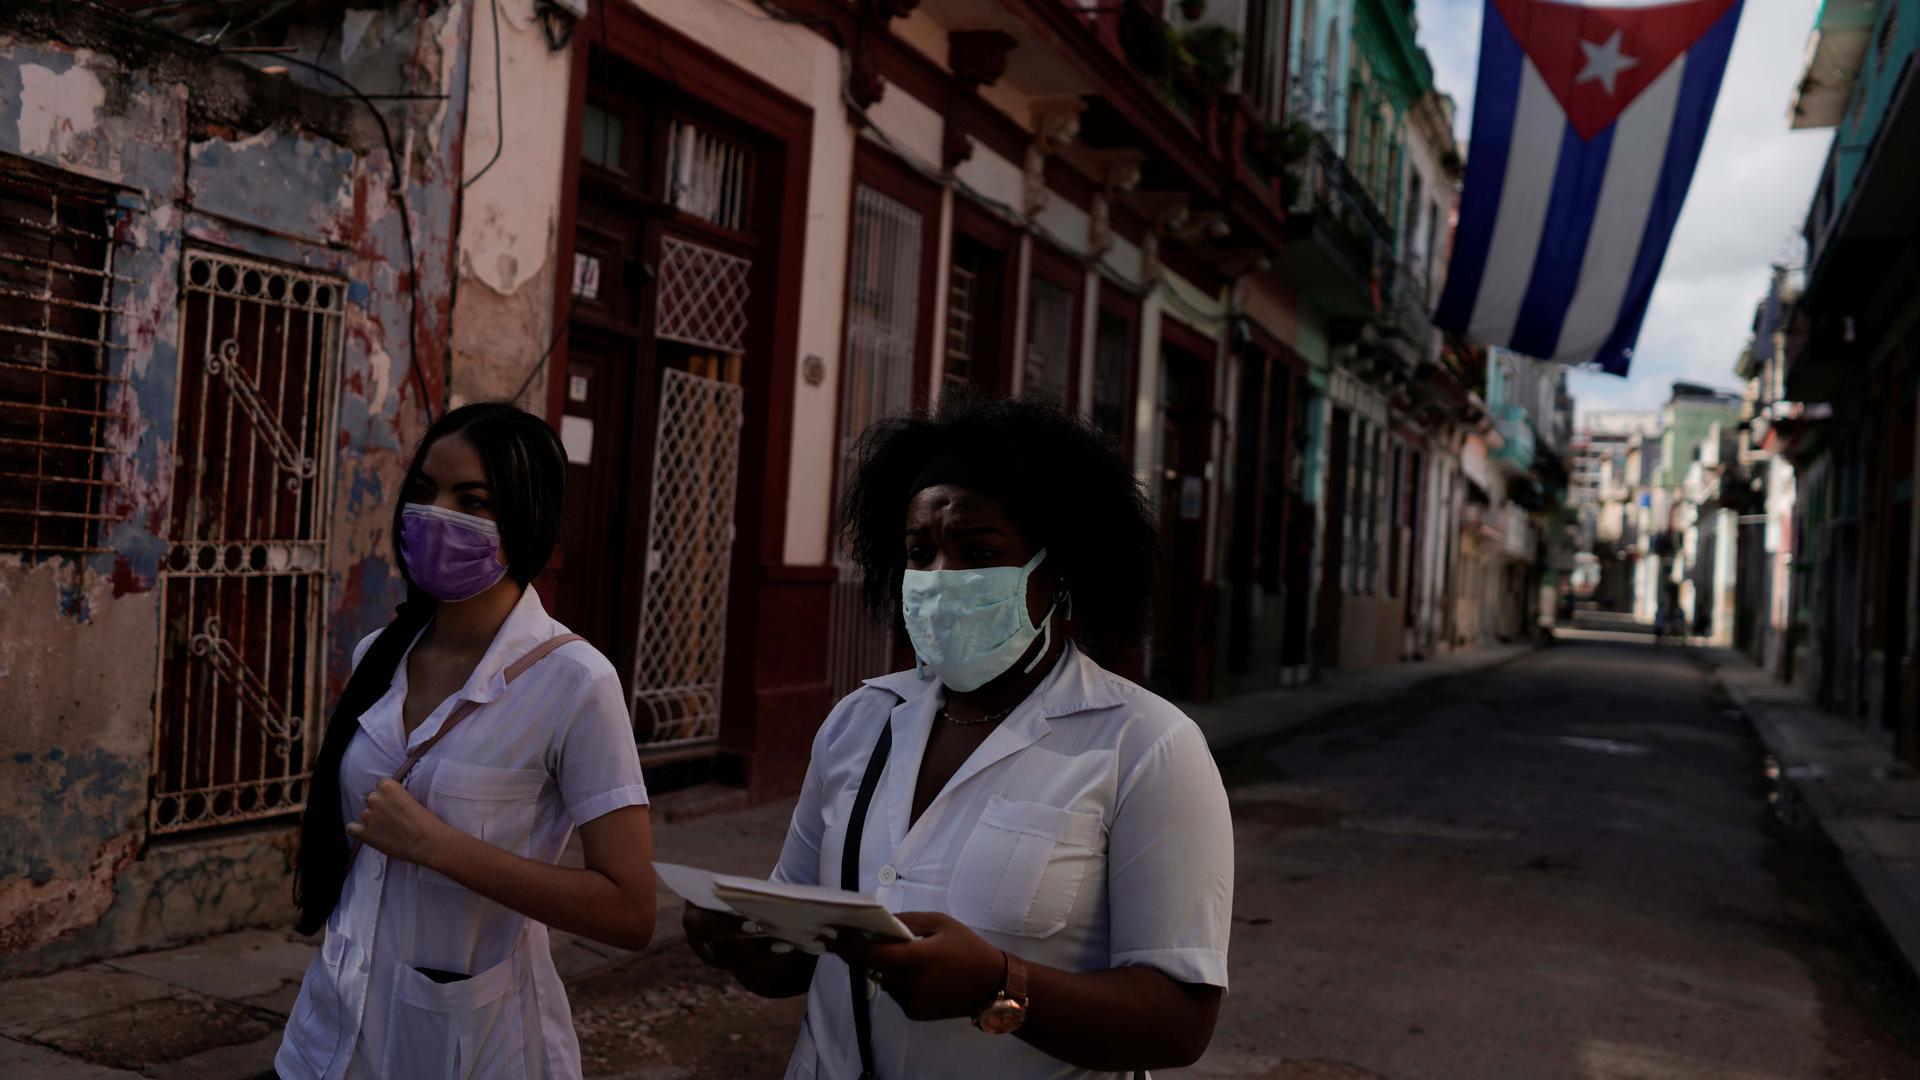 Medical students walk past a Cuban flag as they check door to door for people with symptoms amid concerns about the spread of the coronavirus disease (COVID-19), in downtown Havana, Cuba, May 12, 2020.